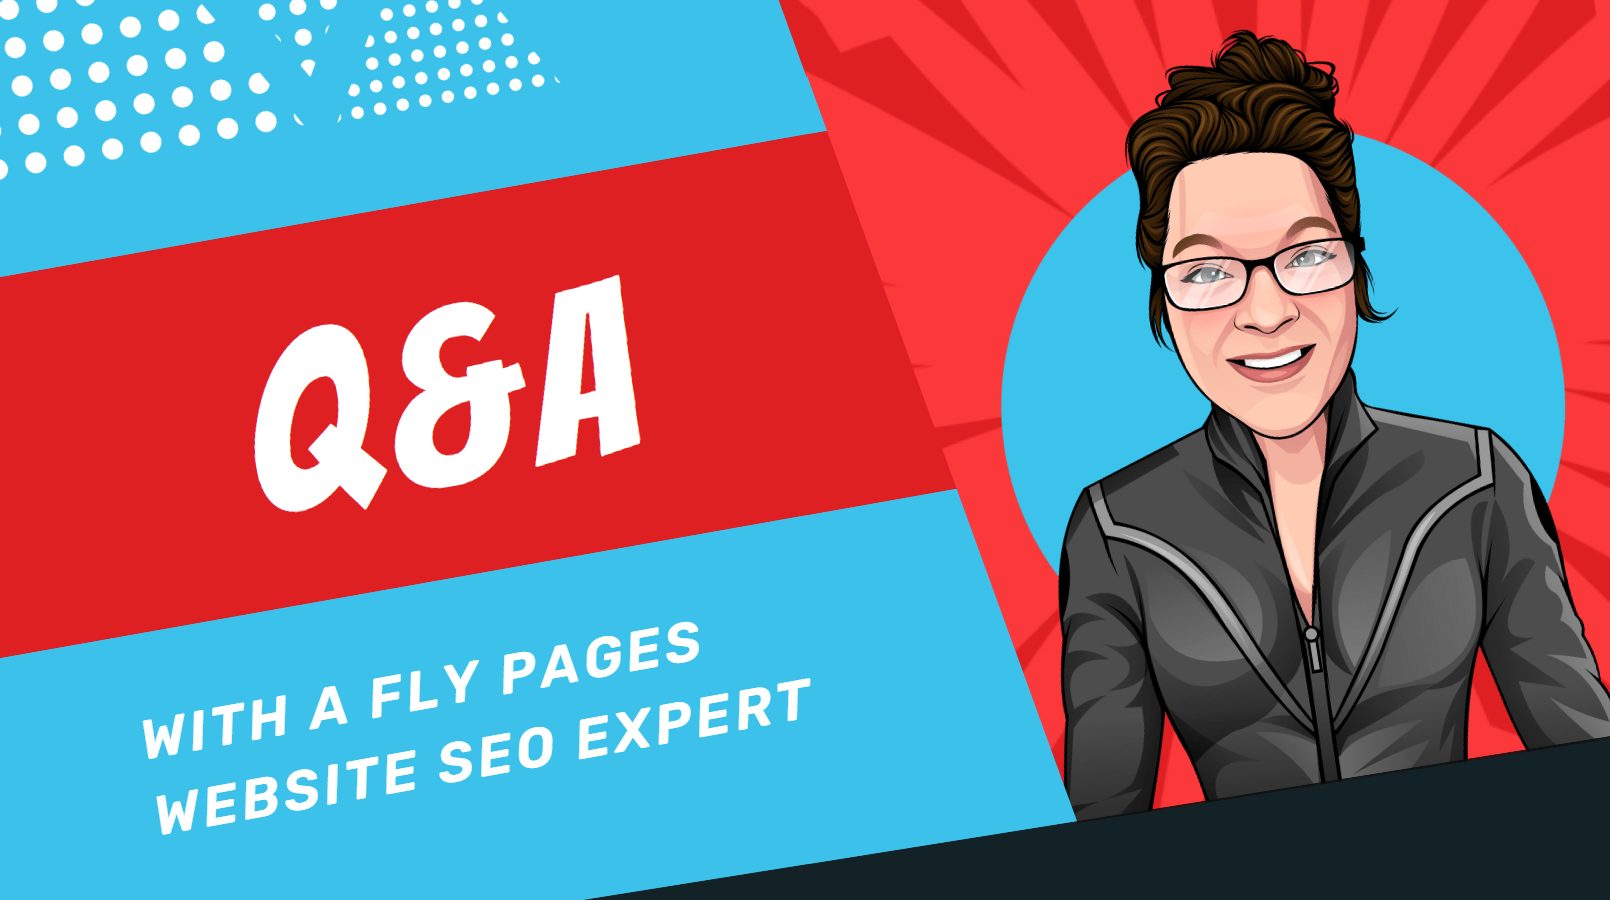 Q & A with a Fly Pages Website SEO Expert